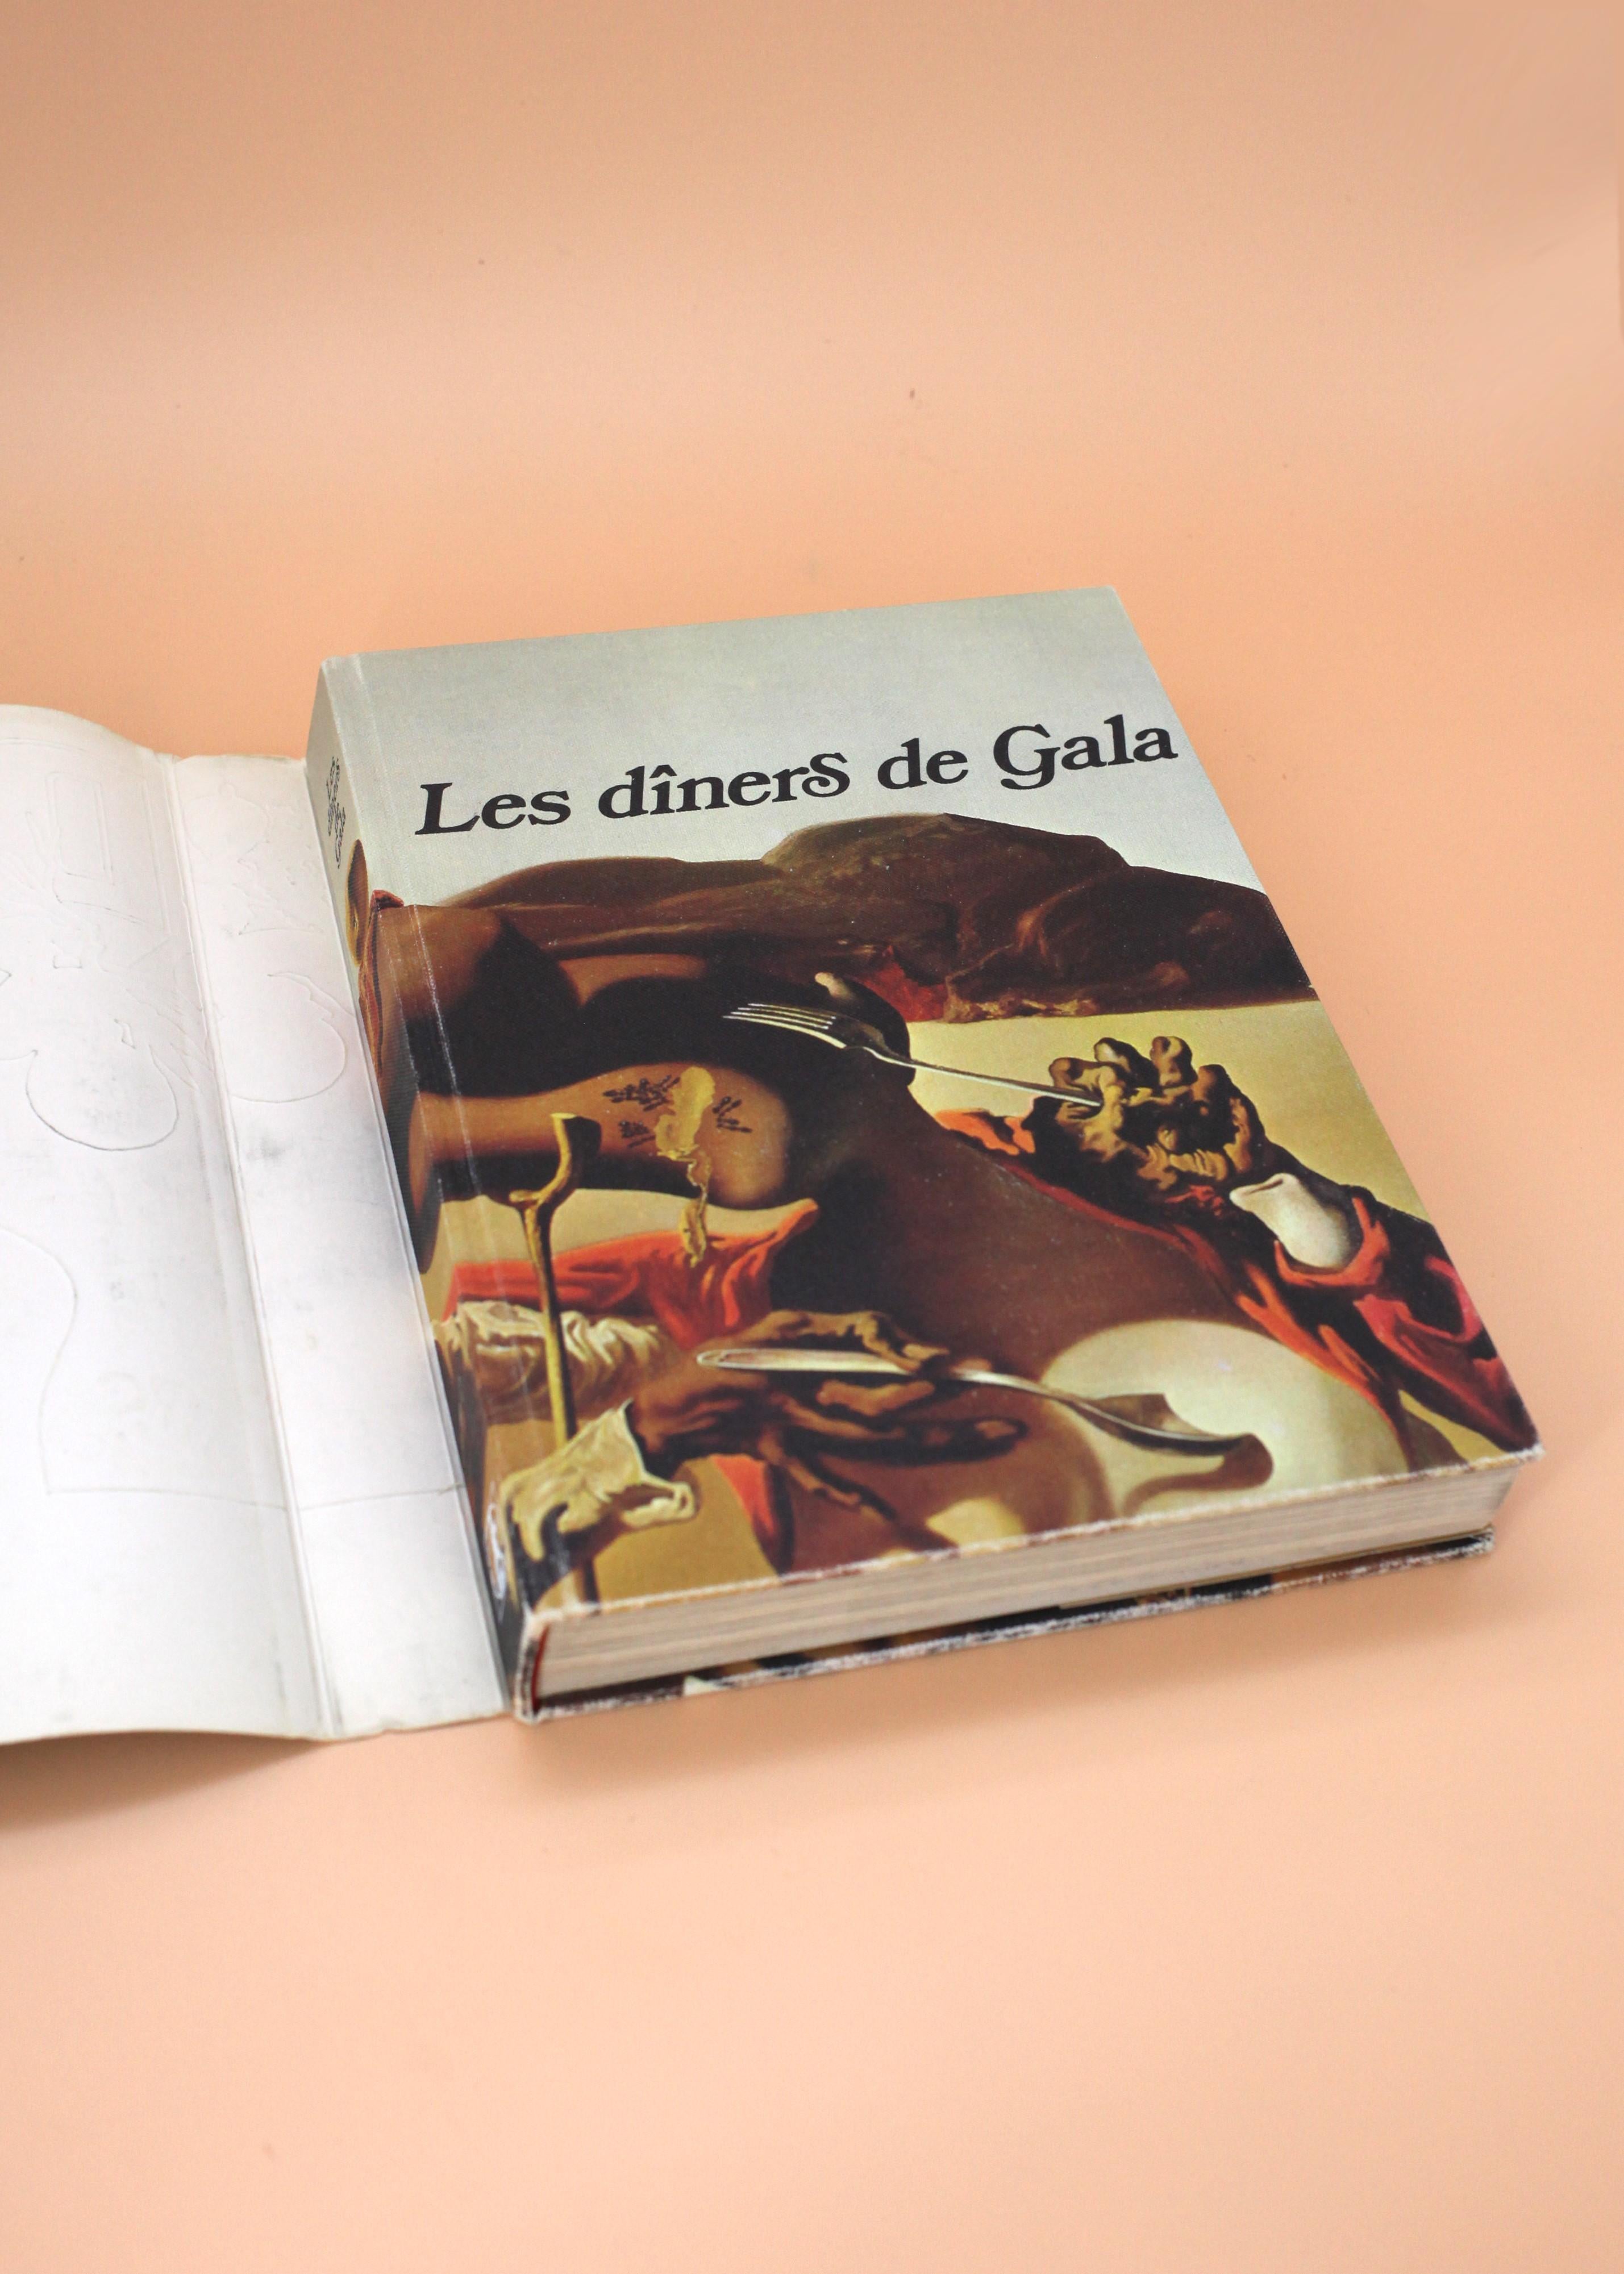 Paper Les diners de Gala. Barcelona: 1974. First Spanish Edition For Sale